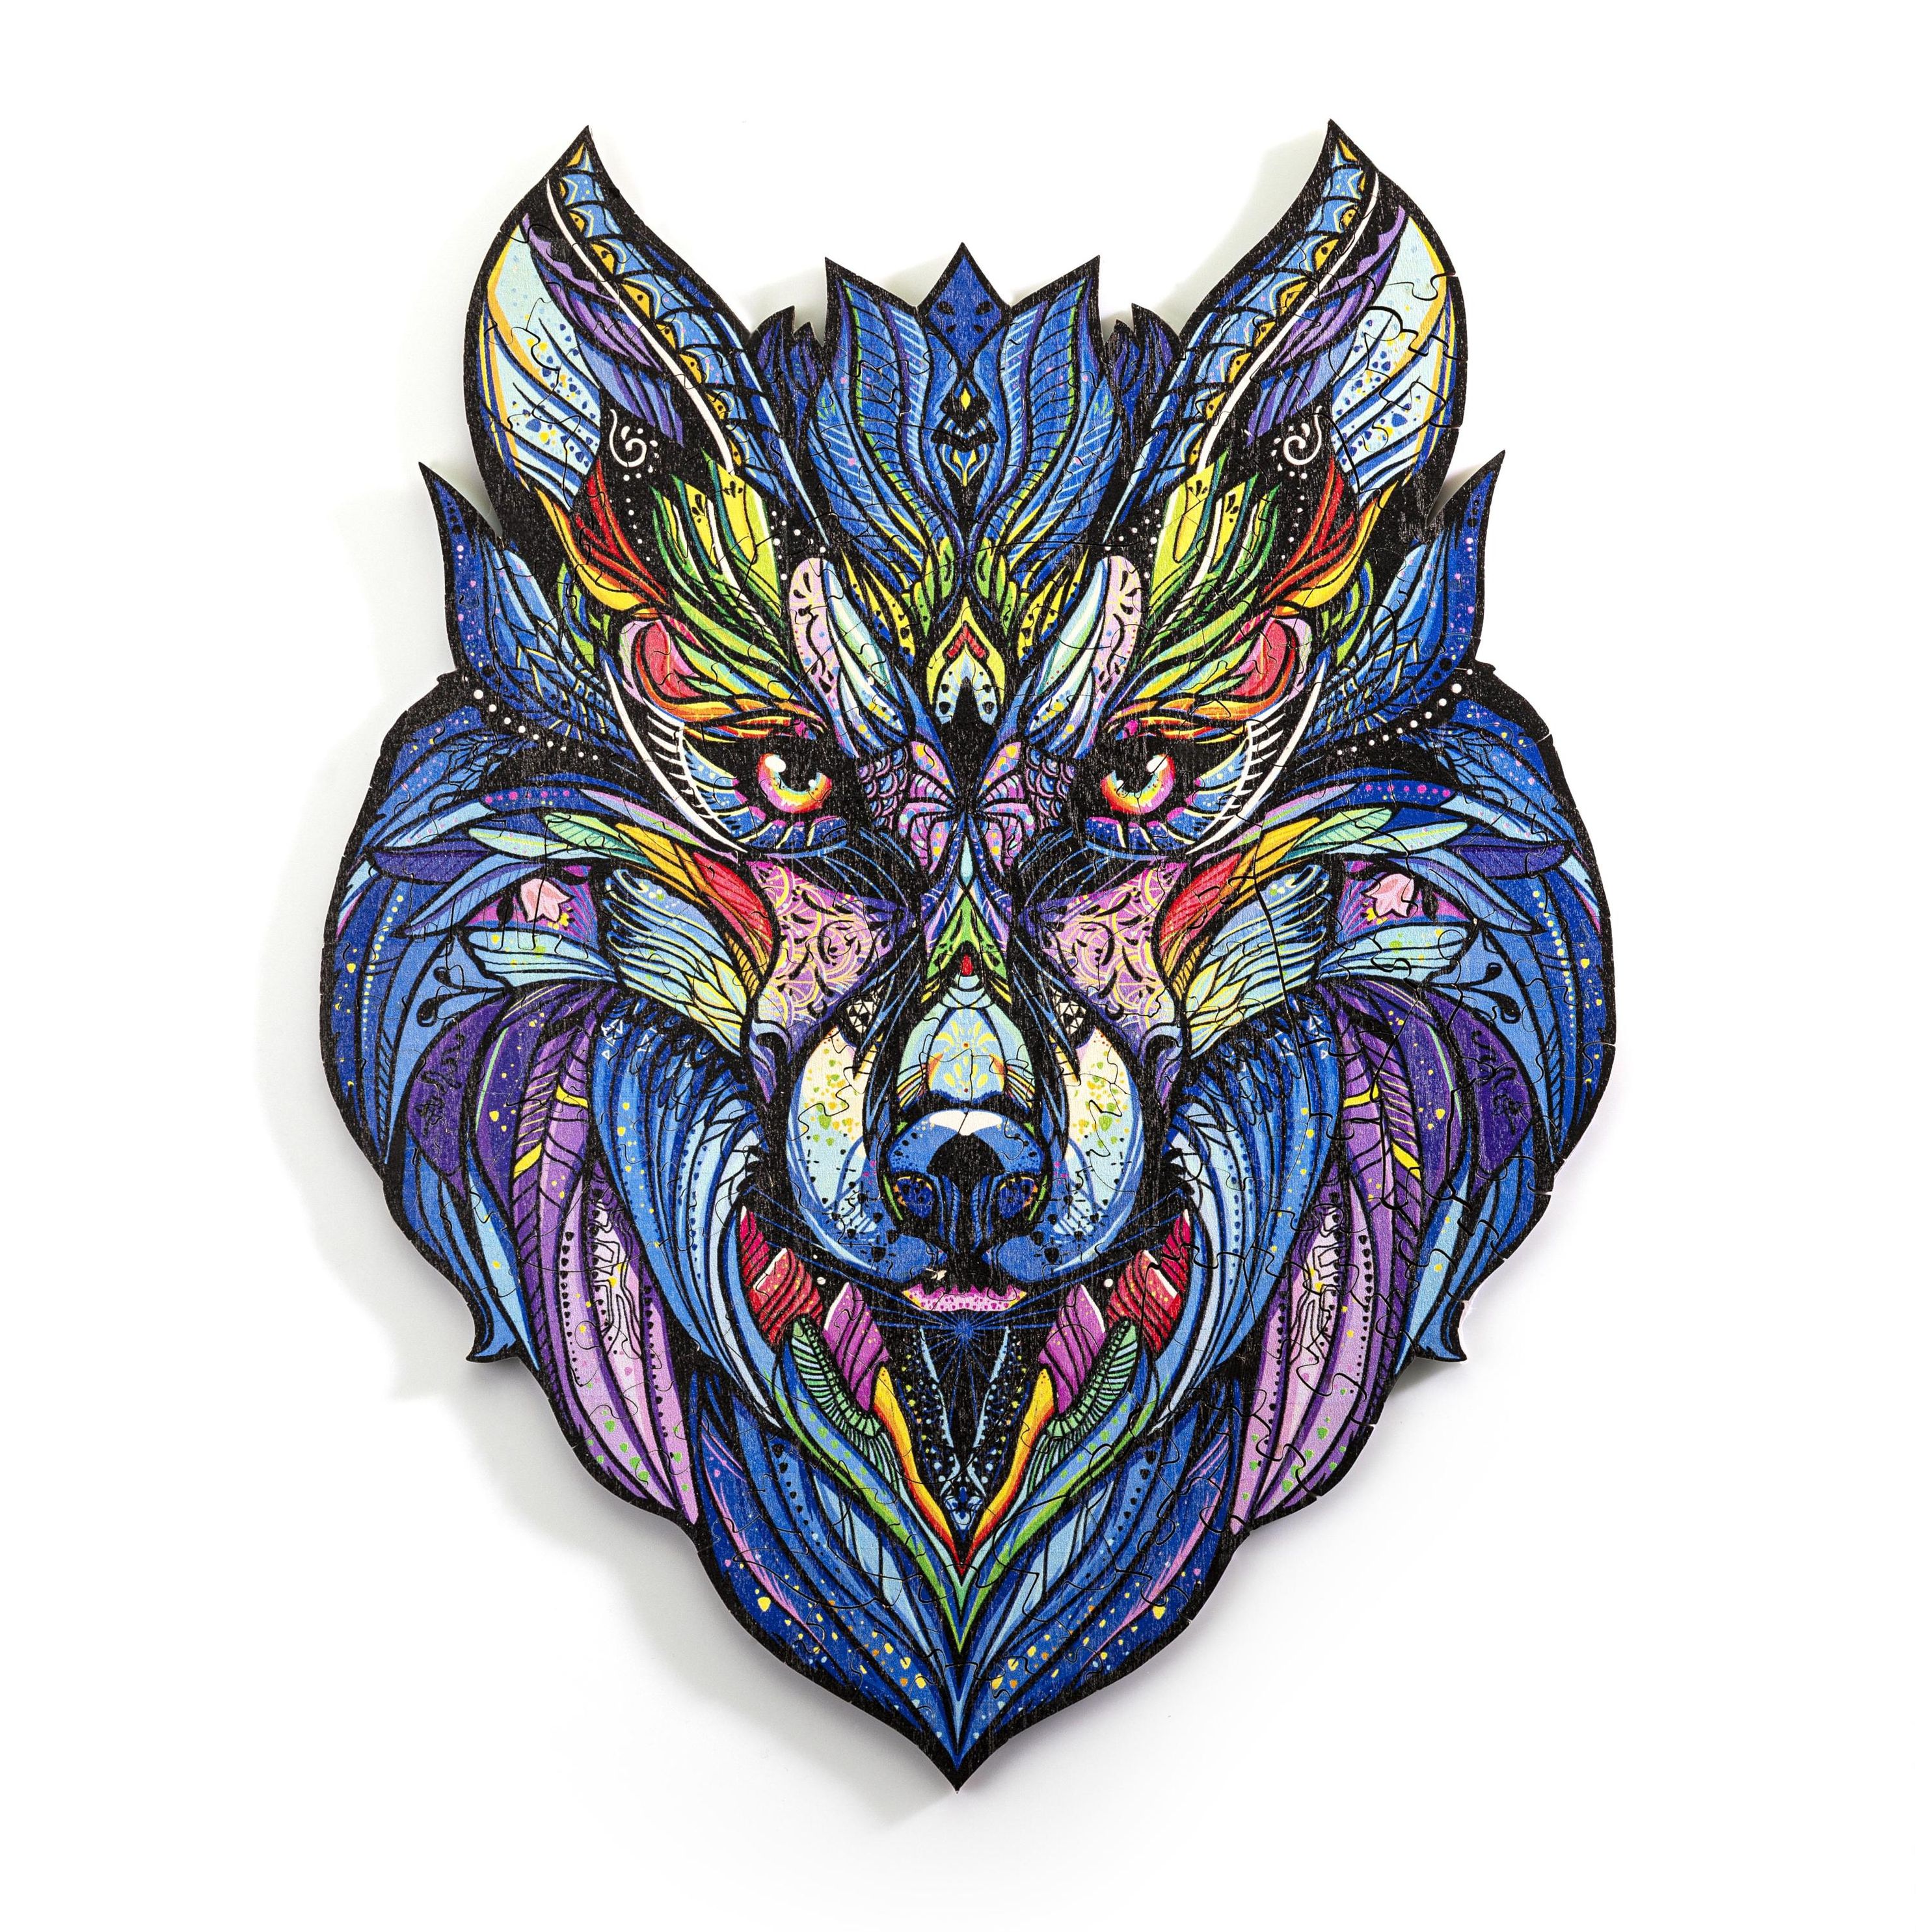 Holz-Puzzle Wolf in Holzbox 200 Teile, 23,2 x 30 cm | Weltbild.de